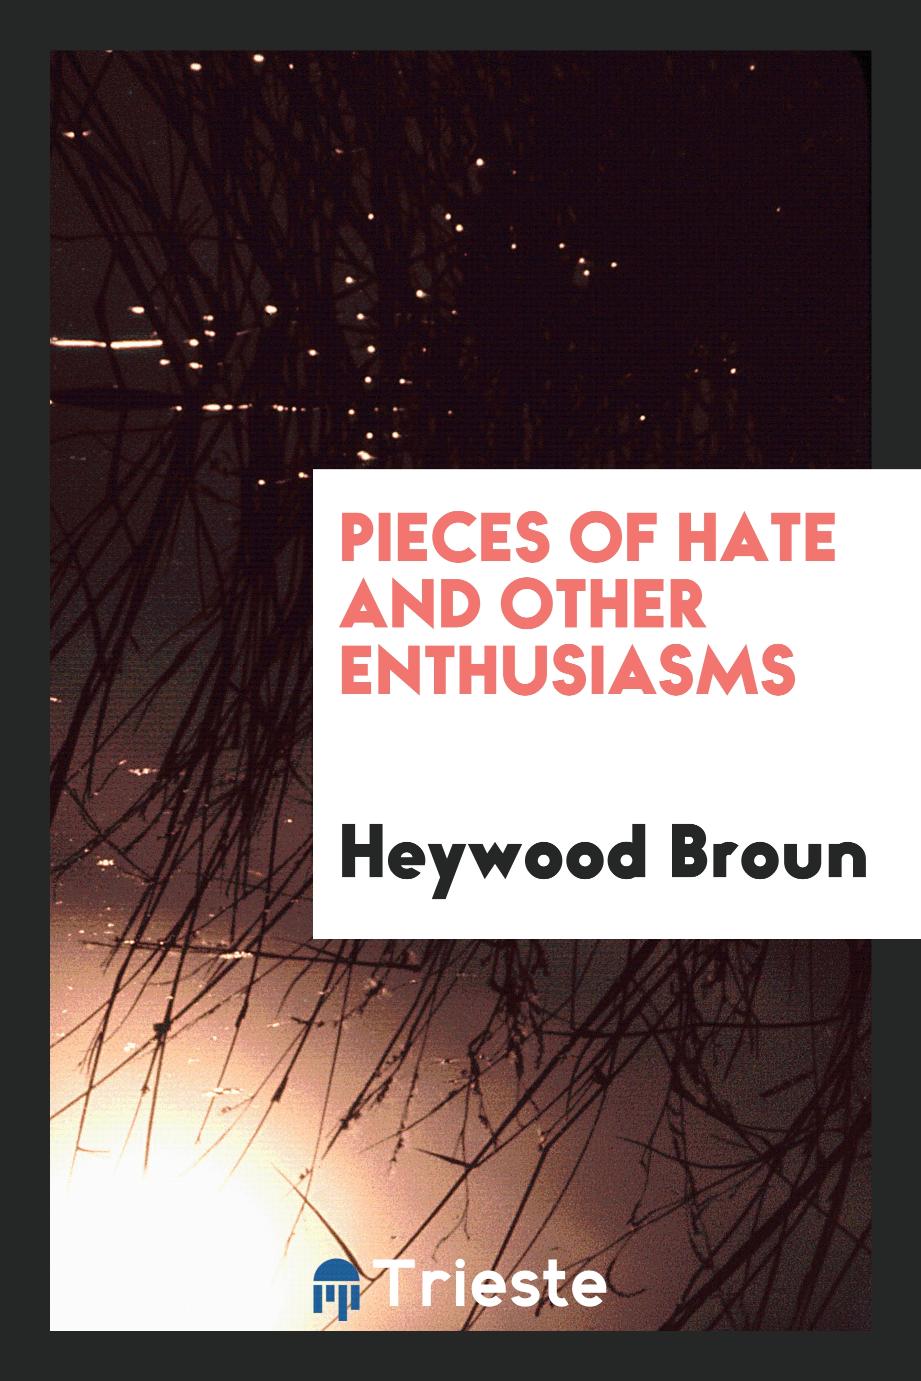 Pieces of hate and other enthusiasms